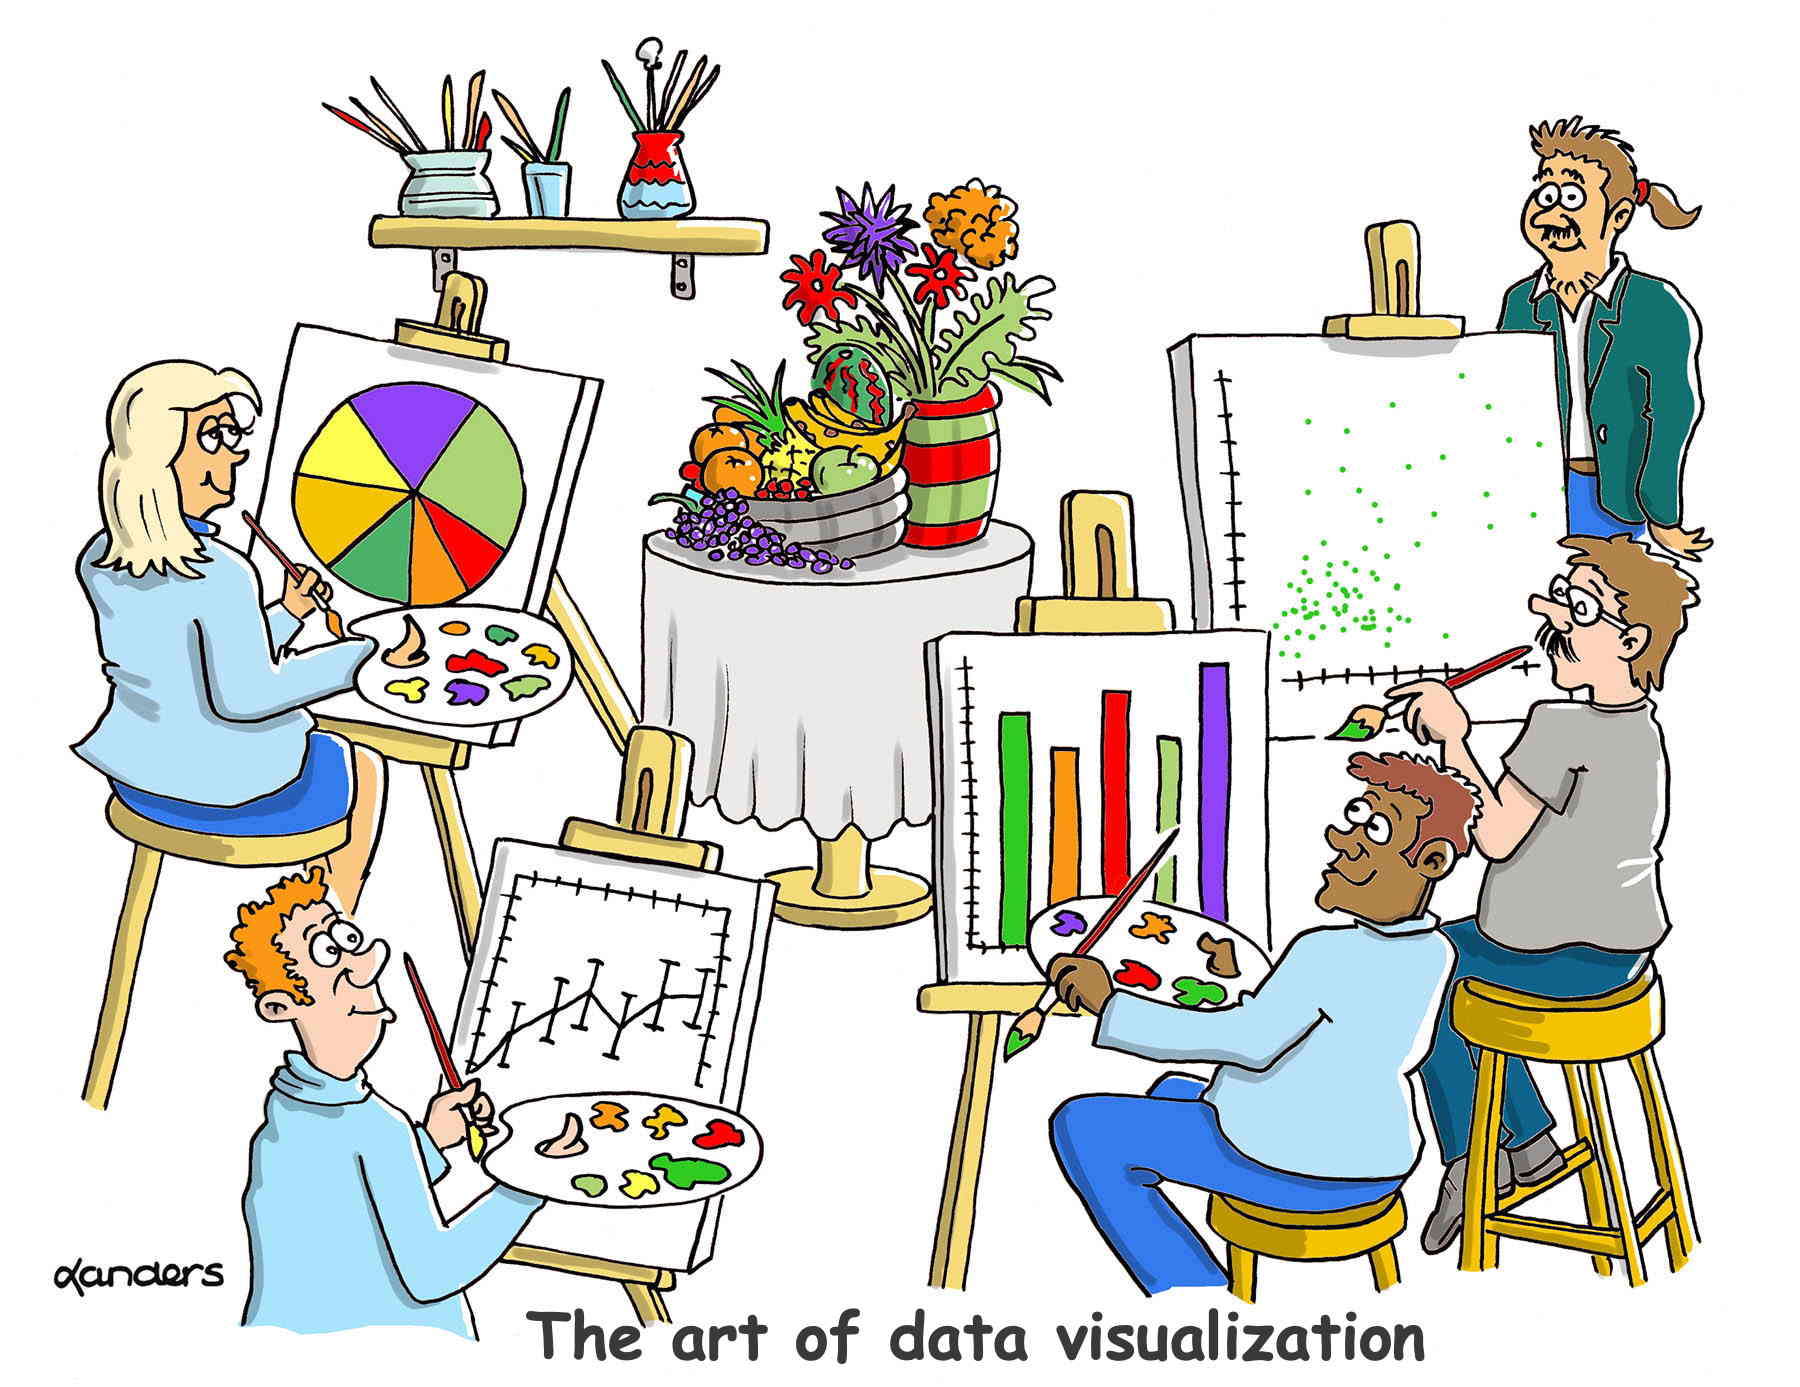 cartoon showing several people in an art class setting each looking at a bowl of colorful fruit and flowers.  However, their paintings all show various statistical plots using the colors  seen.  The caption reads: The art of data visualization.